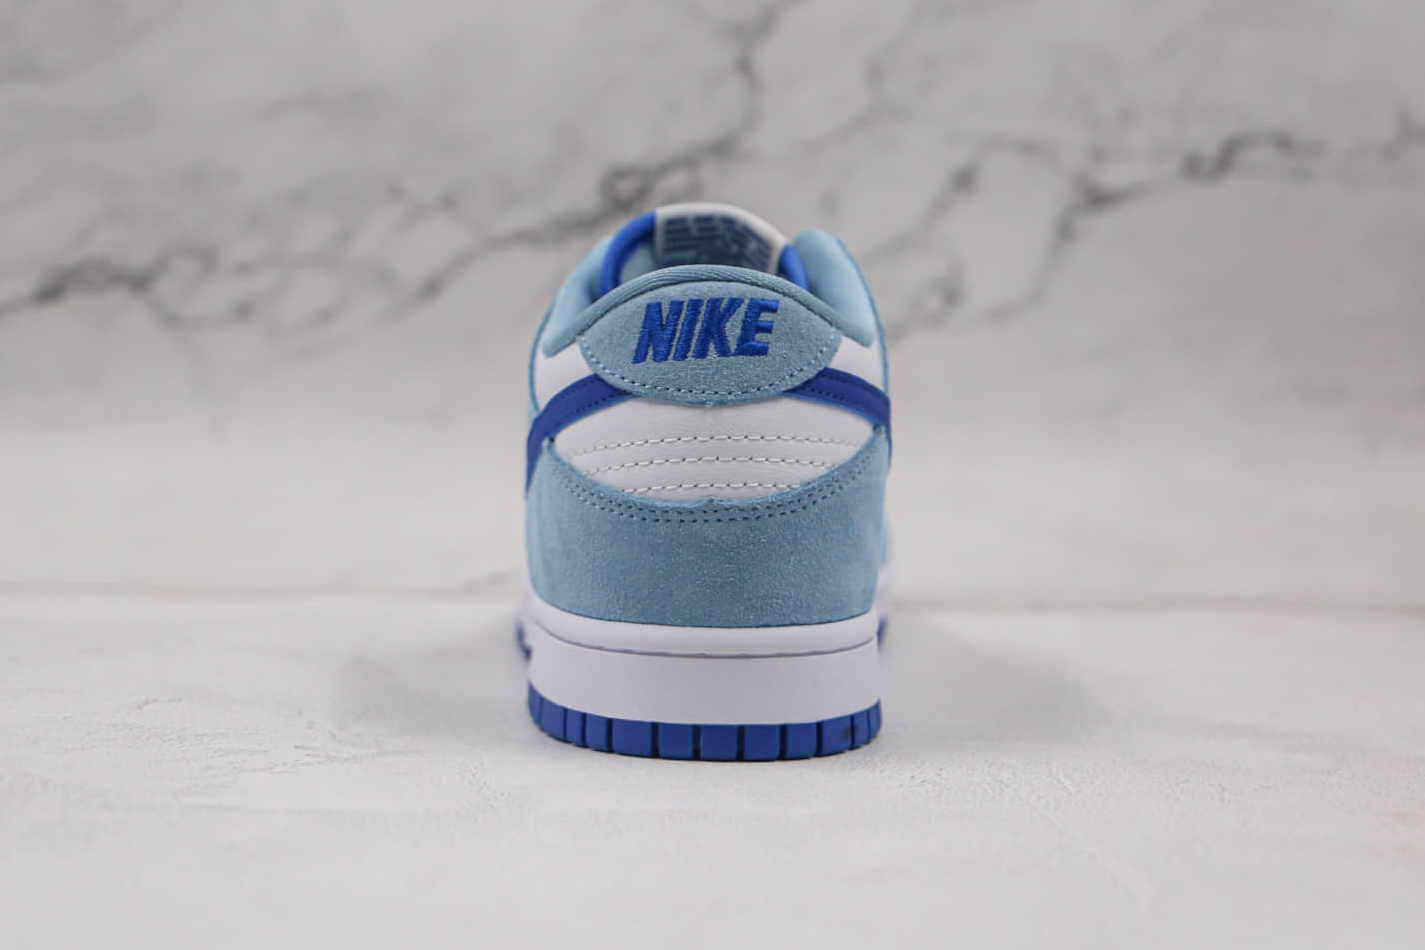 Nike Dunk Low White Light Blue Dark Blue 854866-009 - Stylish and Versatile Sneakers